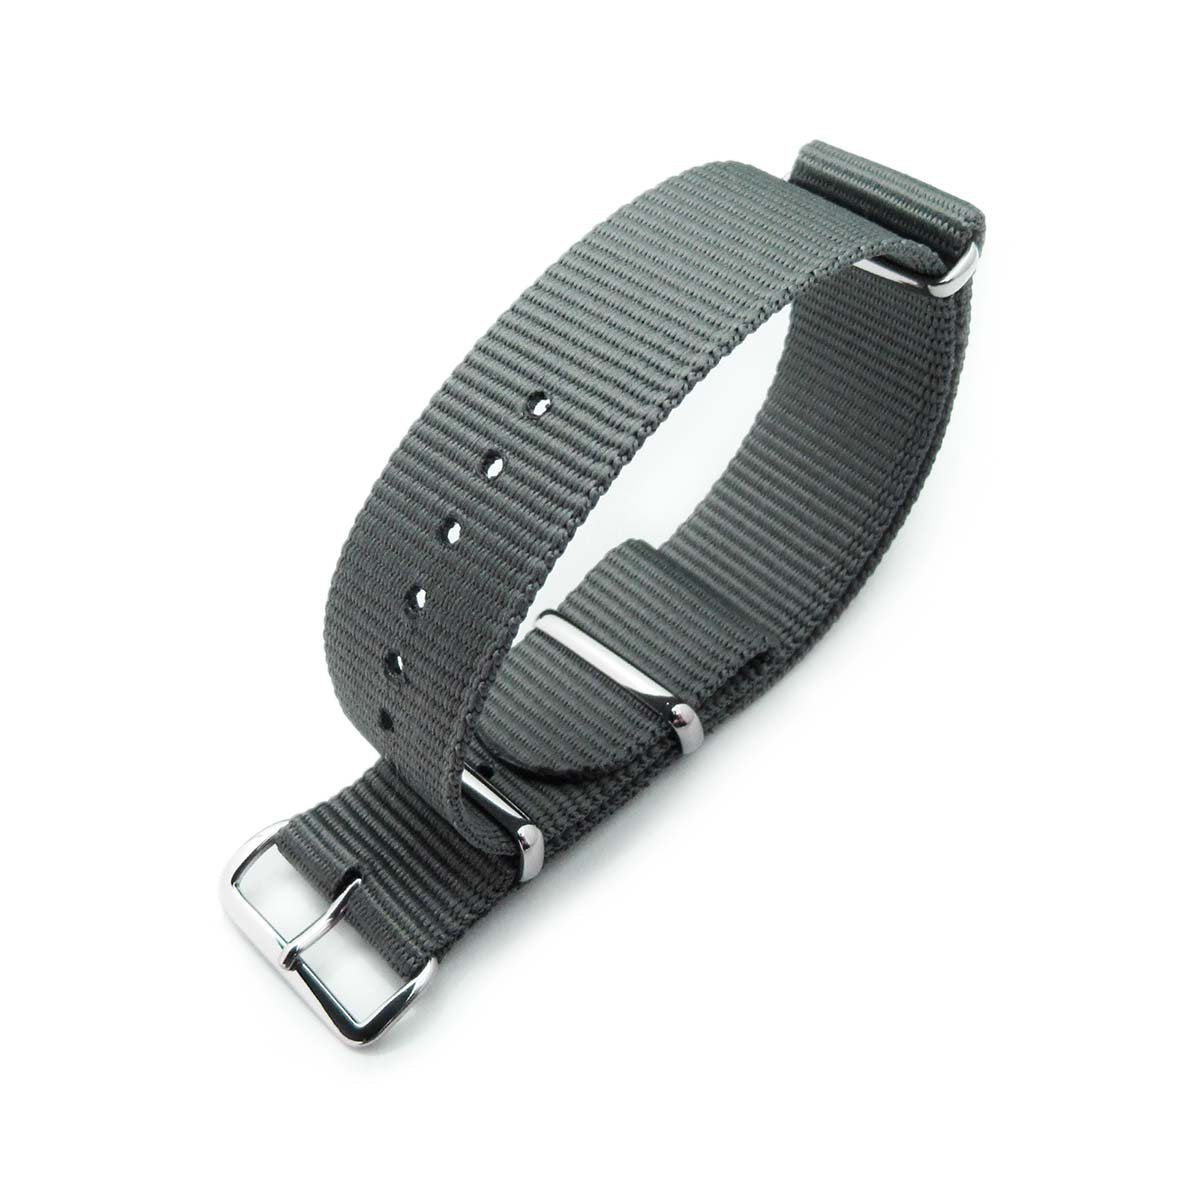 MiLTAT 22mm G10 Military Watch Strap Ballistic Nylon Armband Polished Military Grey Strapcode Watch Bands